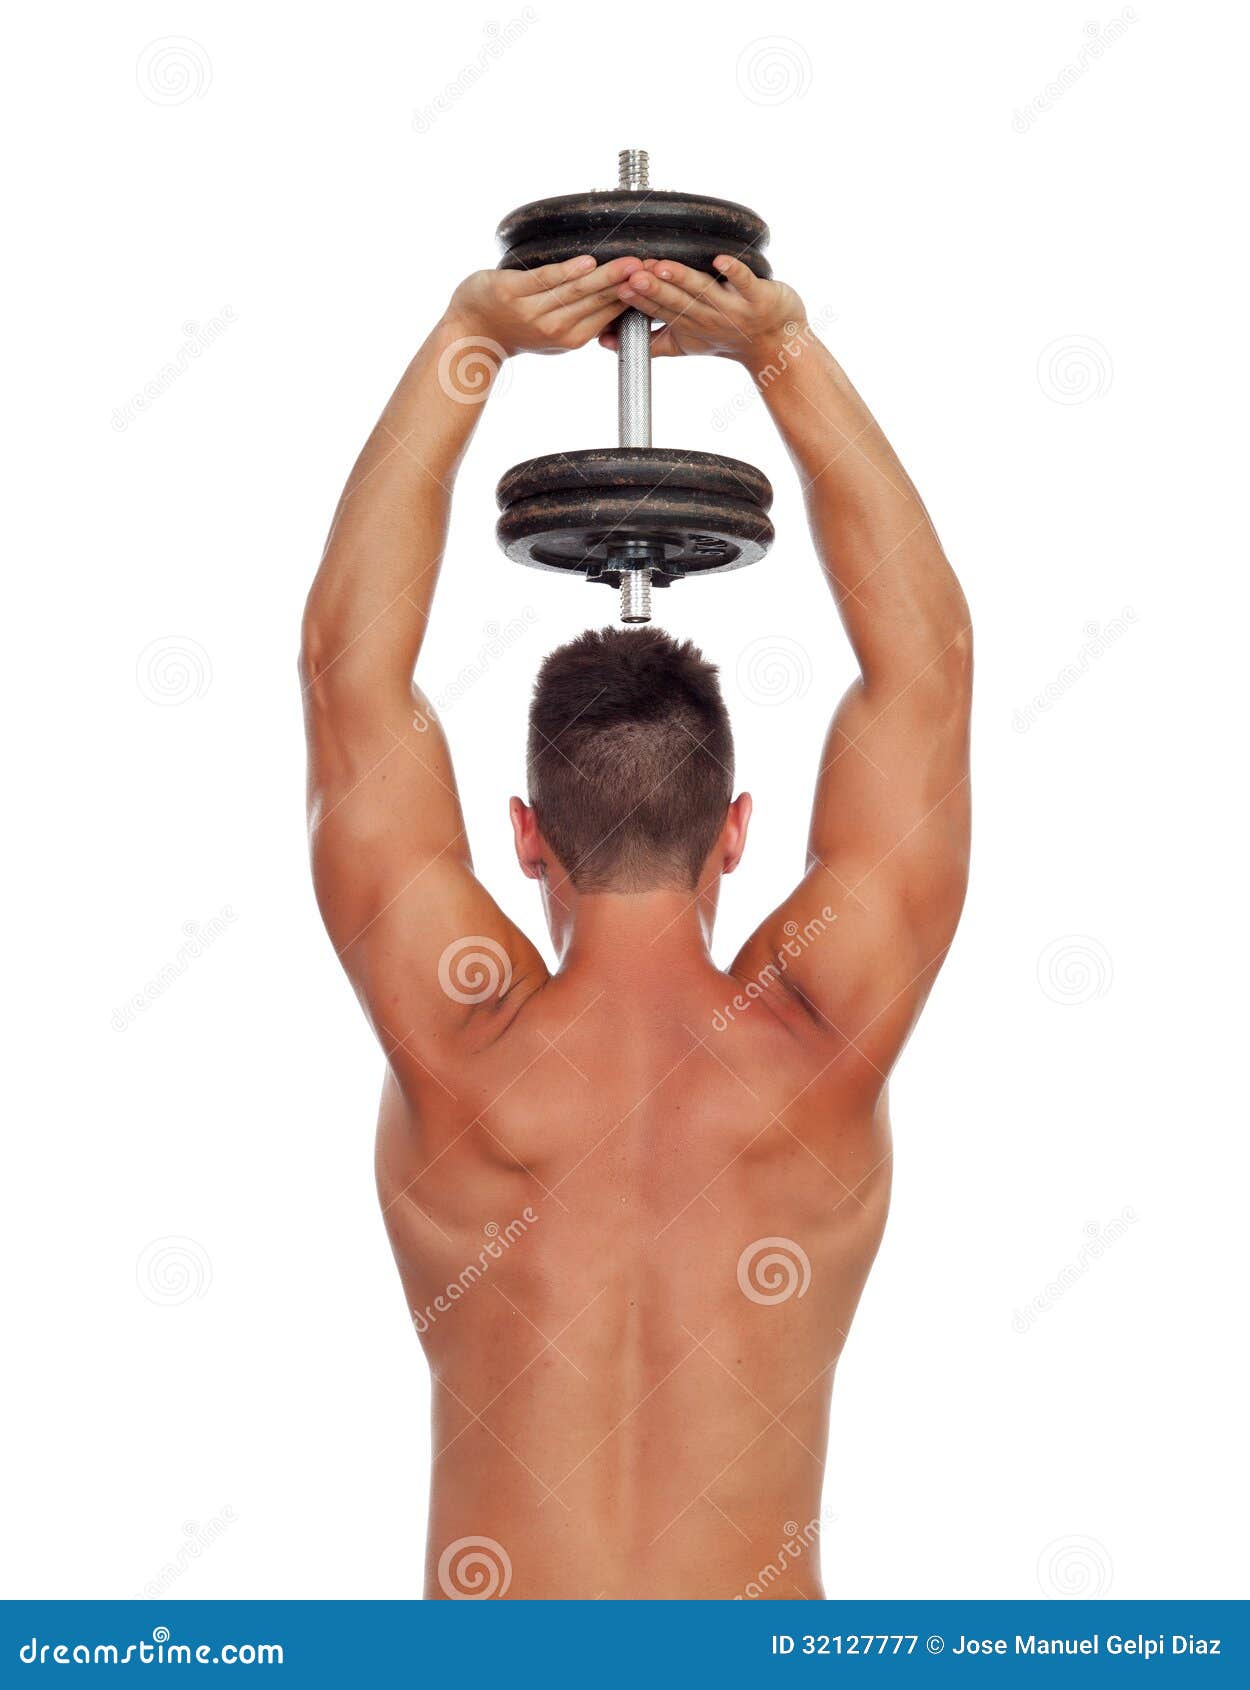 What are some back exercises using dumbbells?